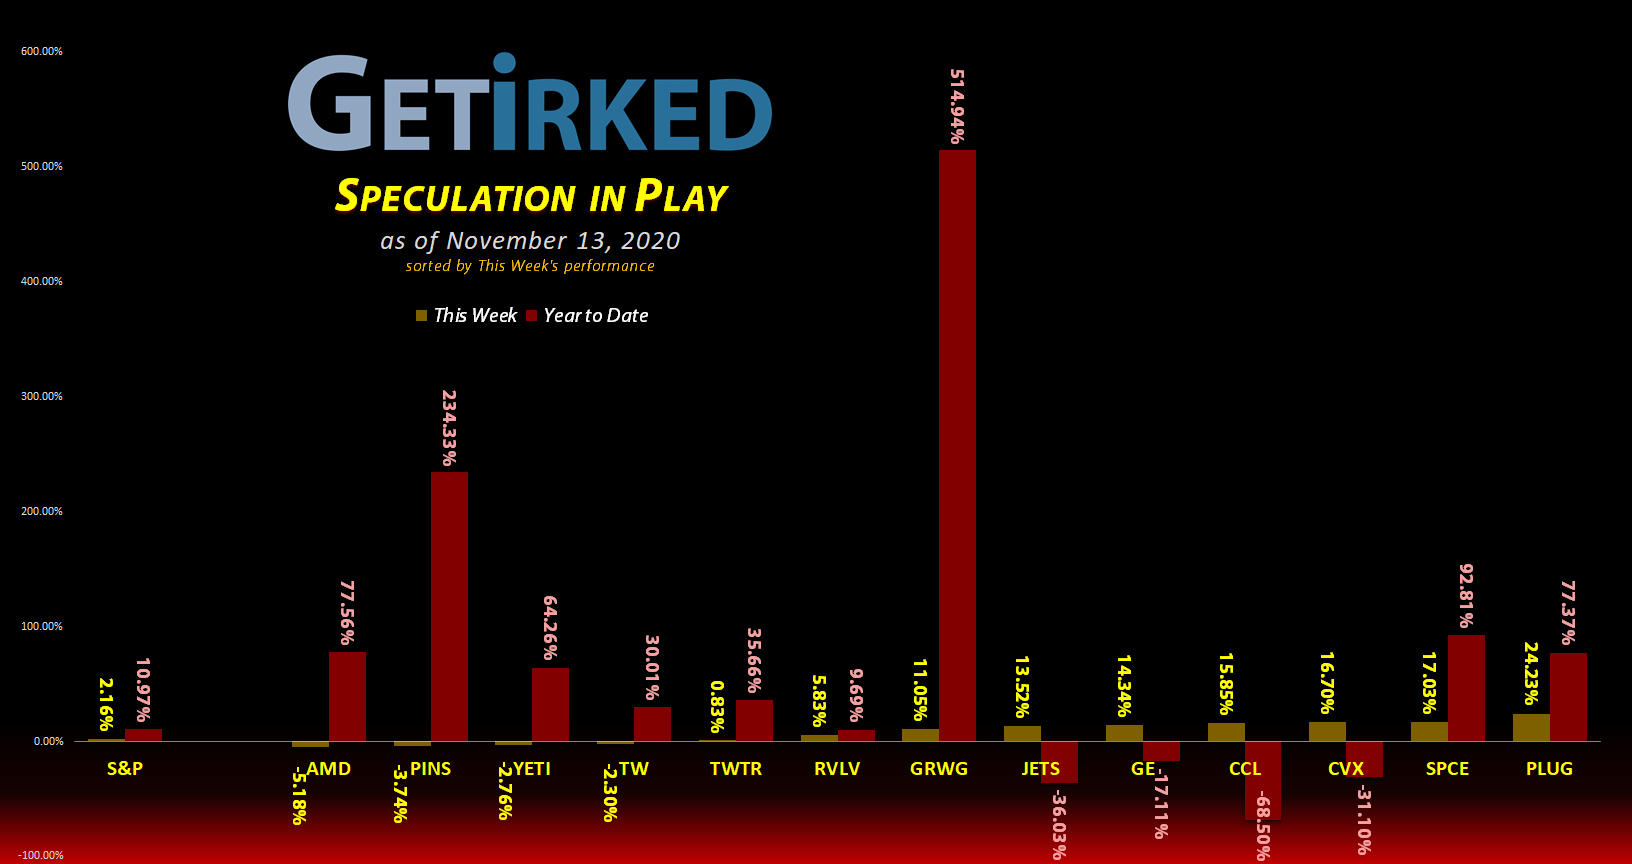 Get Irked's Speculation in Play - November 13, 2020